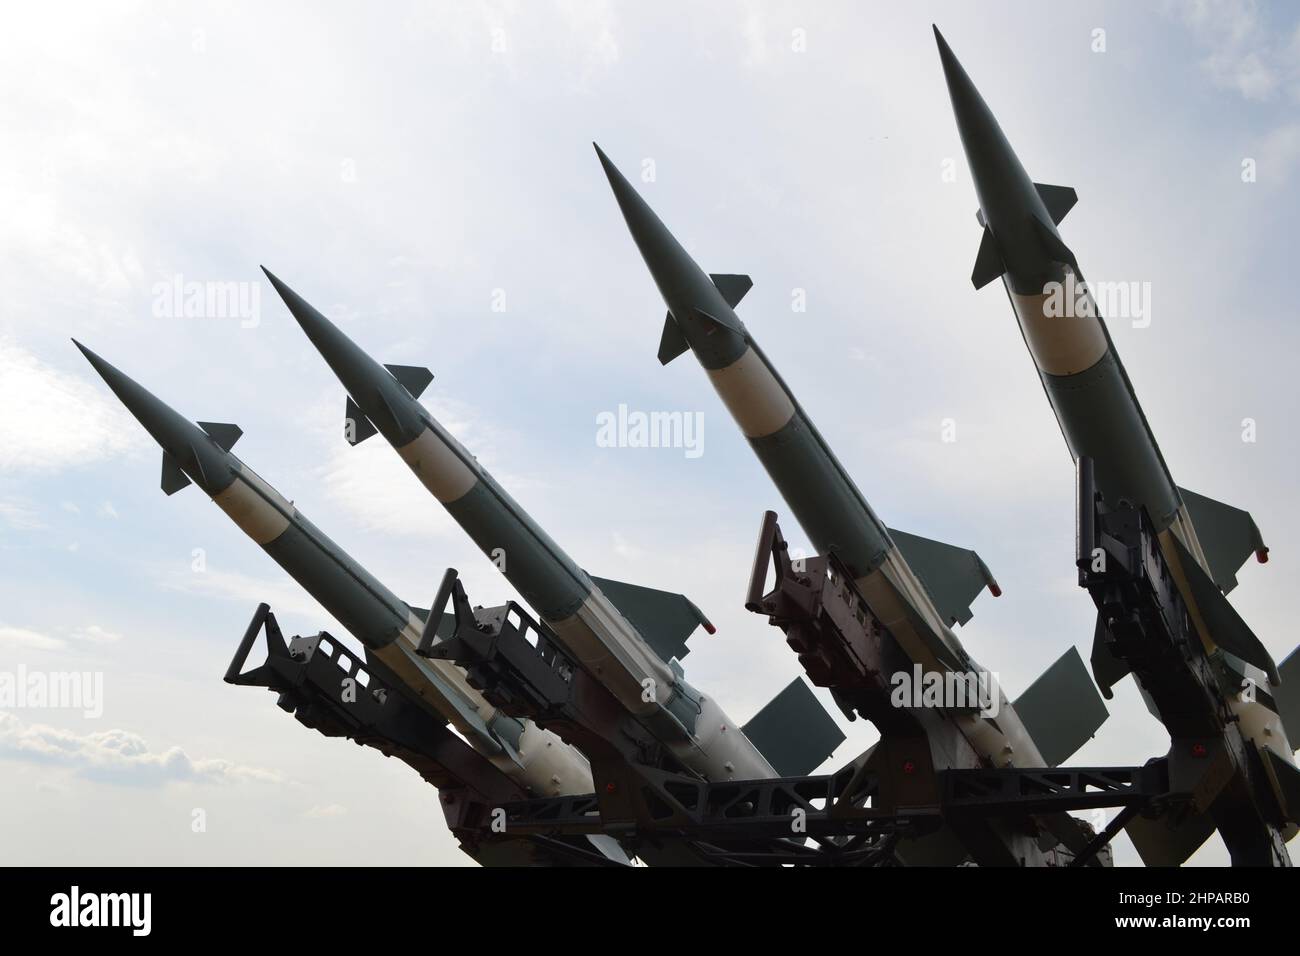 Radom, Mazowieckie, Poland - August 23th, 2015: Anti-aircraft cruise missles on a launcher Stock Photo